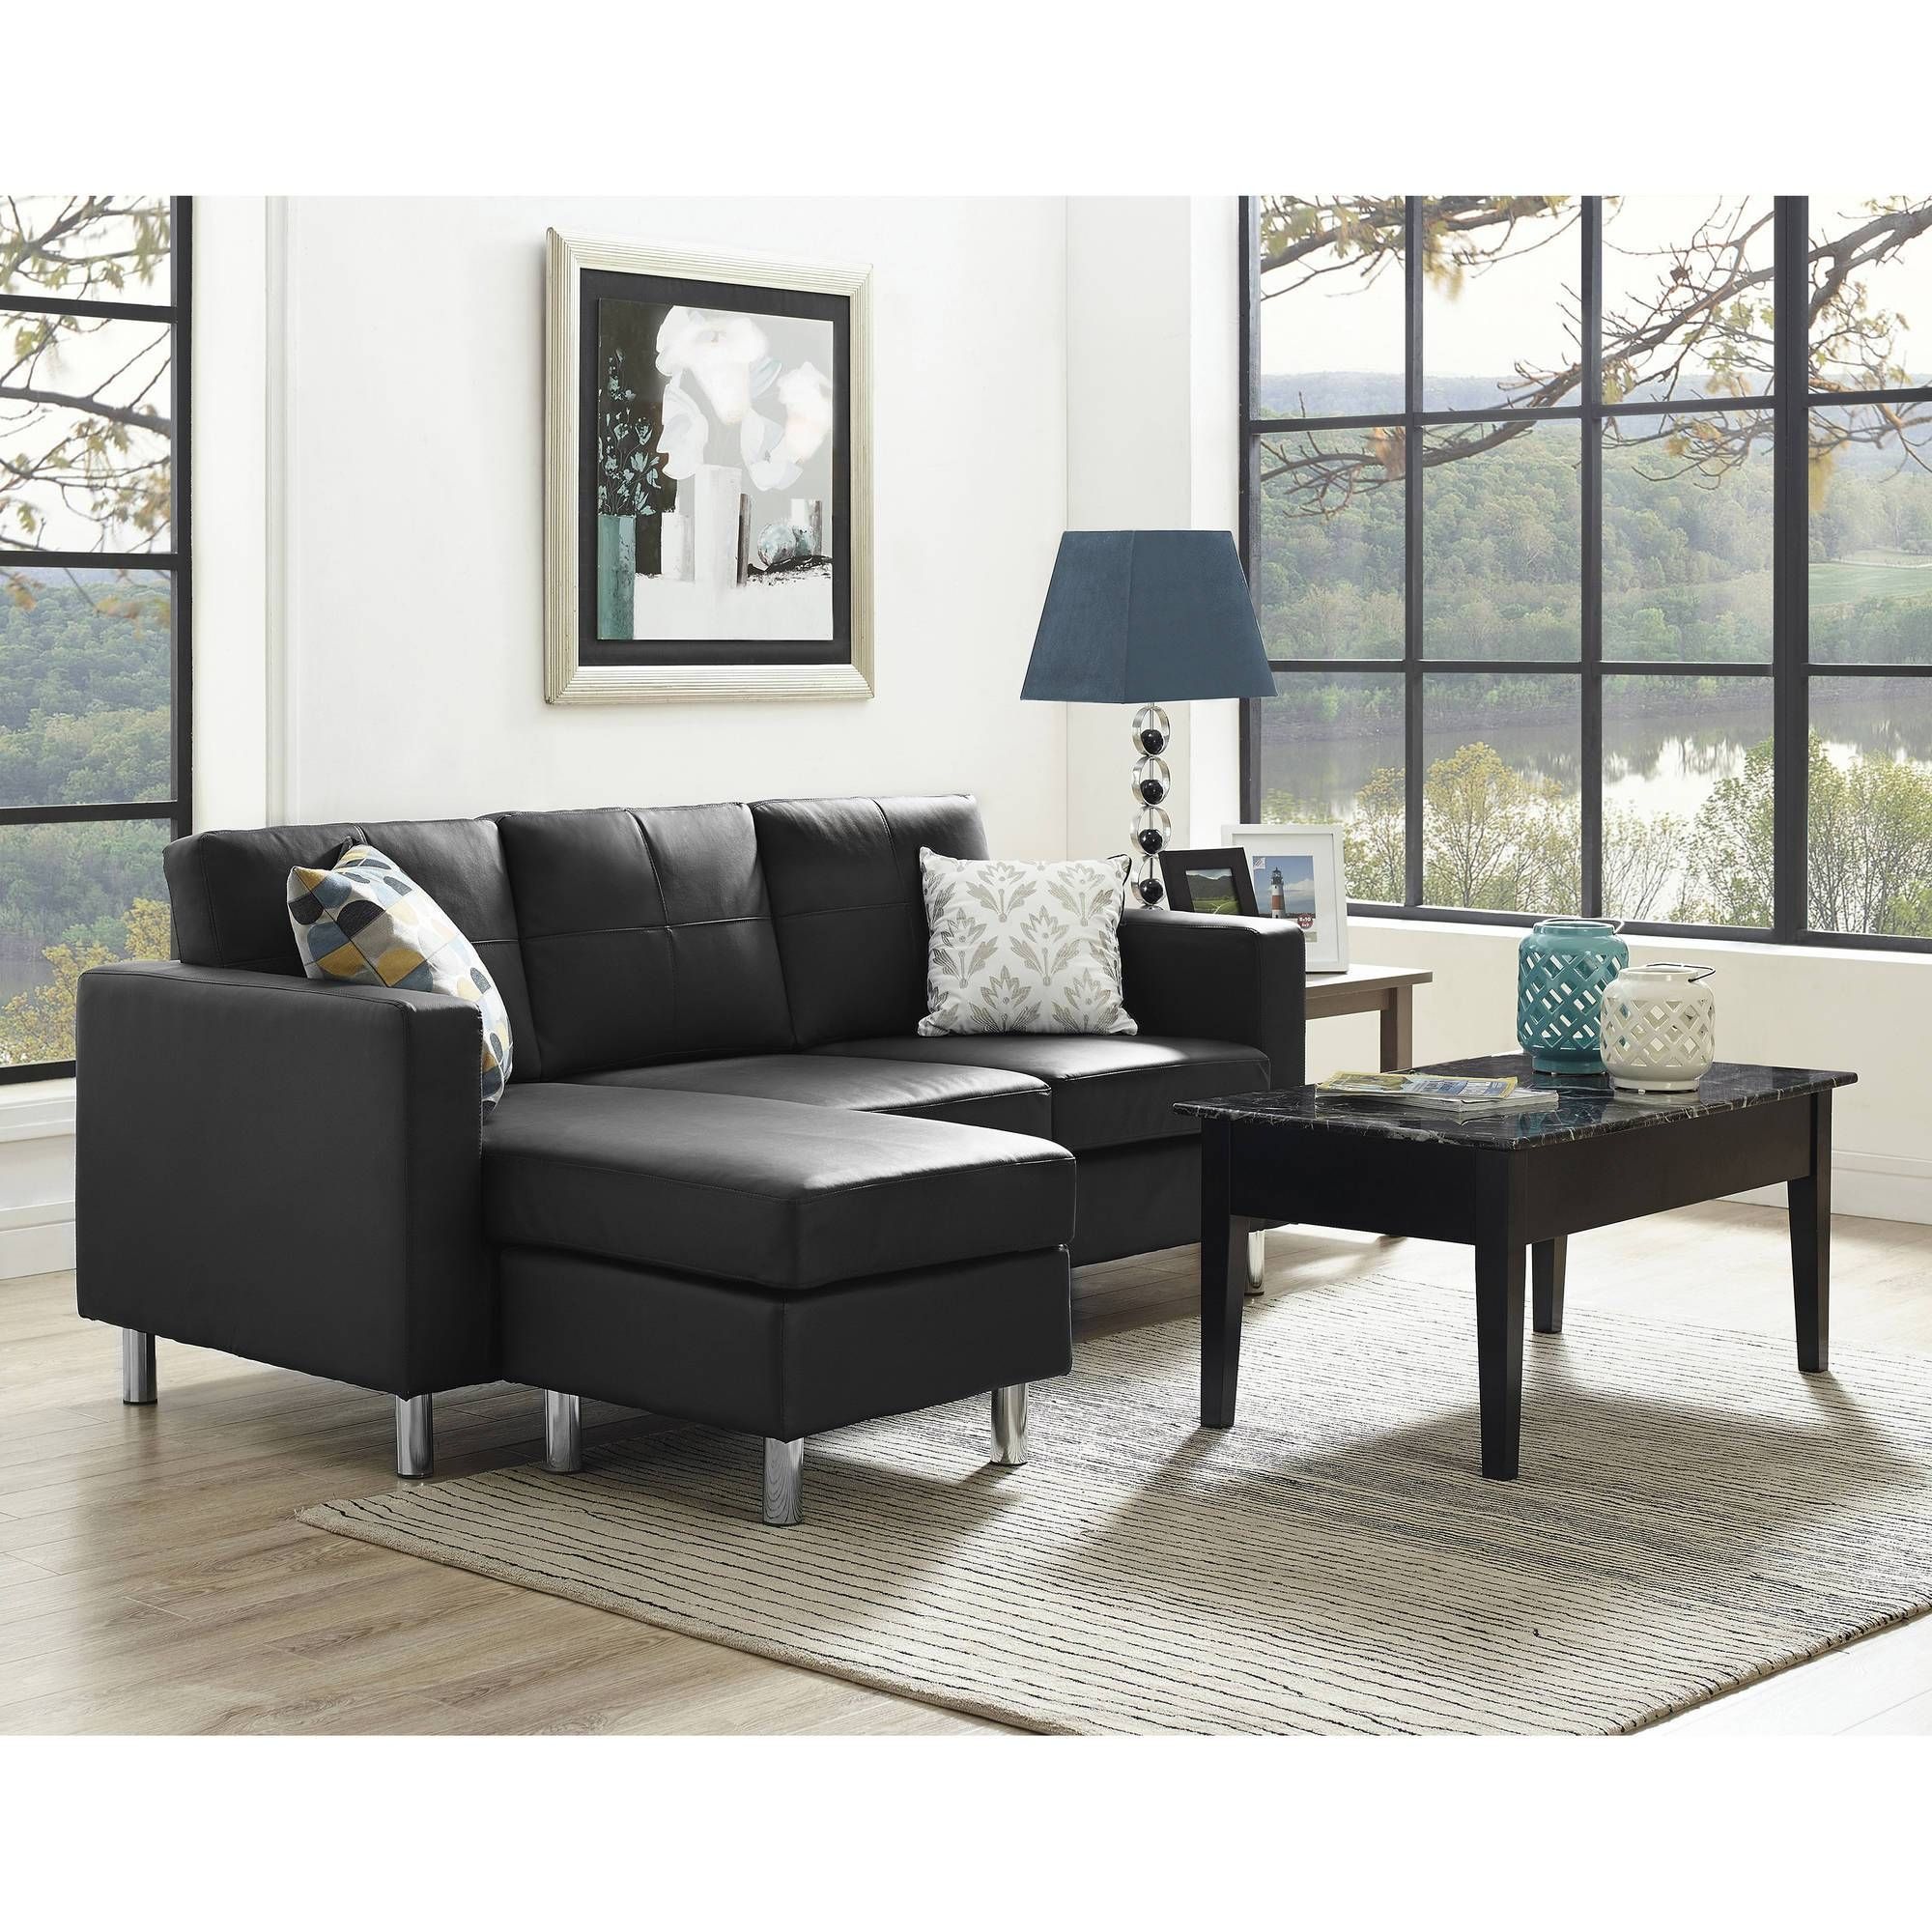 Dorel Living Small Spaces Configurable Sectional Sofa, Multiple Within Sectional Sofas In Small Spaces (View 2 of 25)